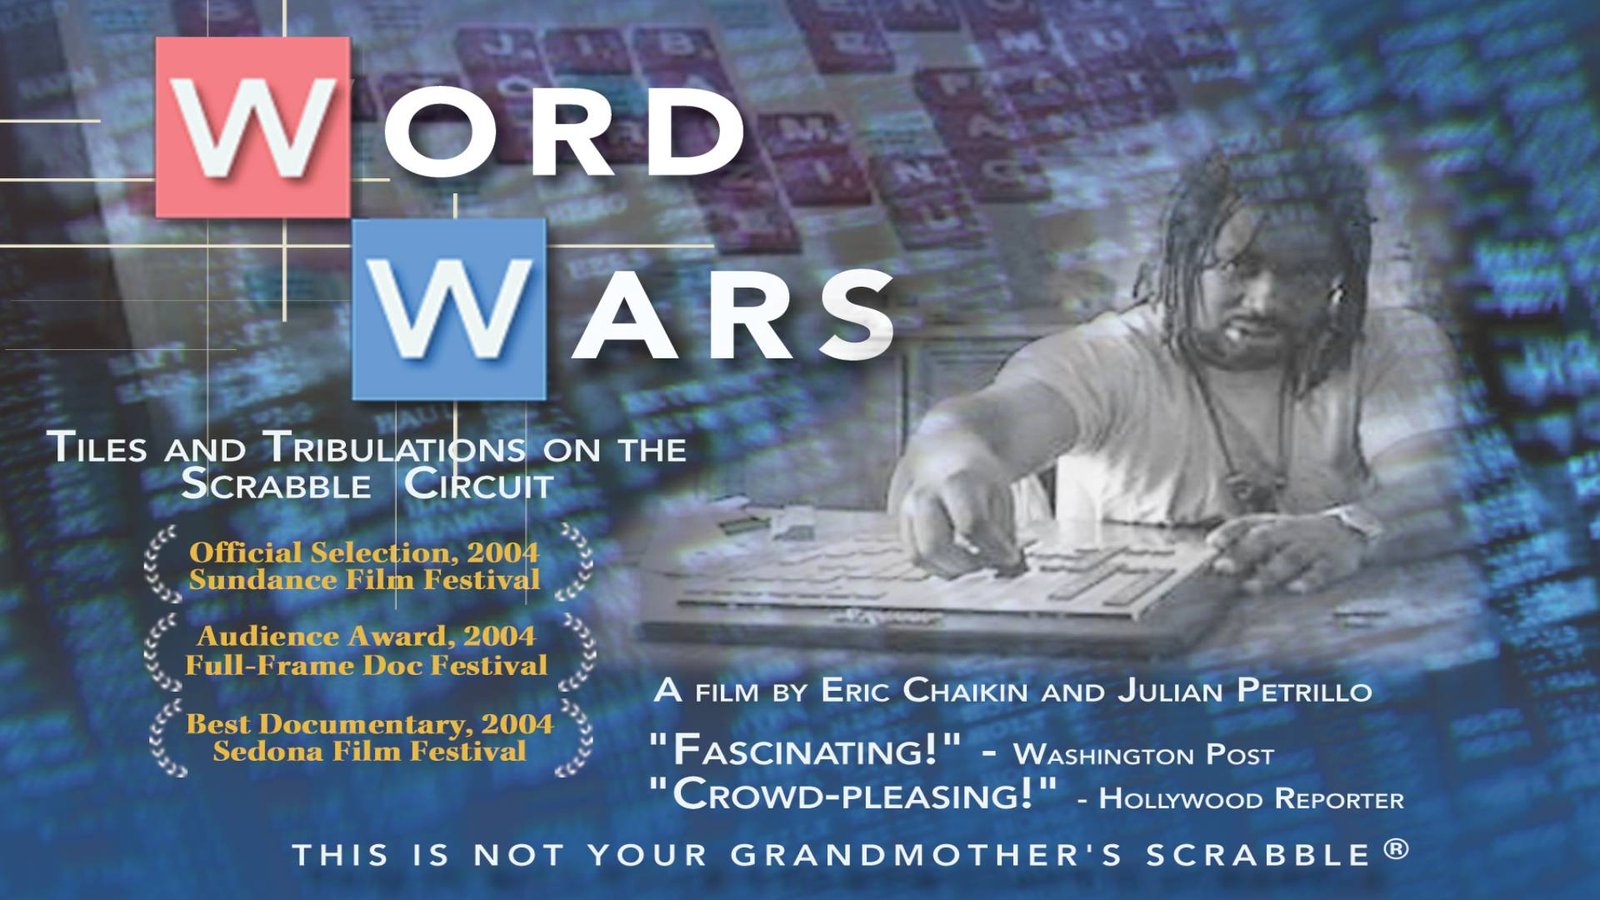 Word Wars - Tiles and Tribulations on The Scrabble Circuit